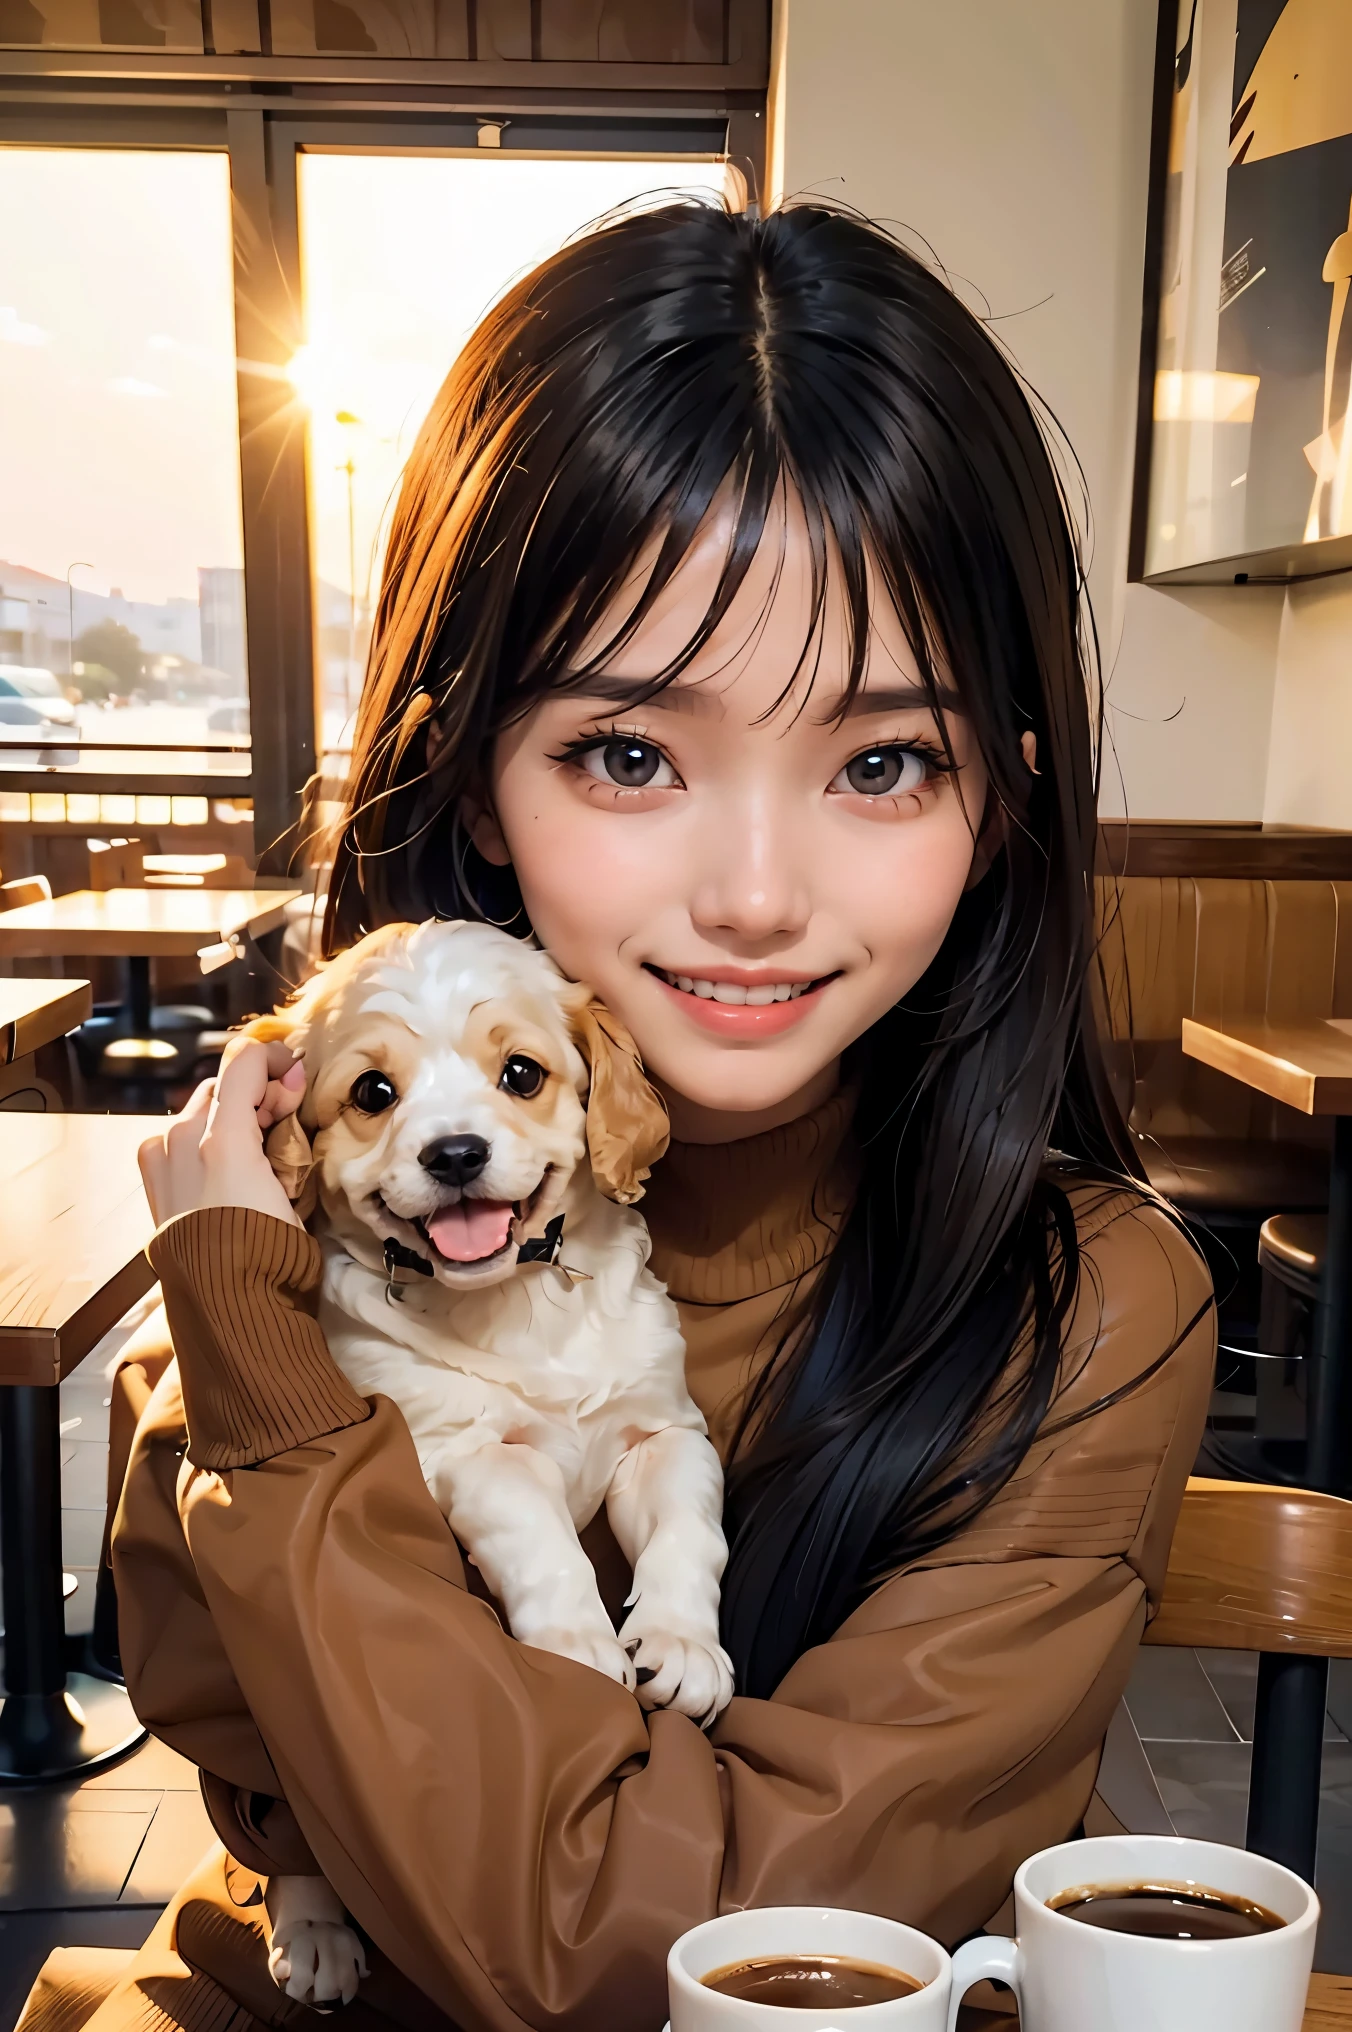 Cute black long straight hair brown eyes round face girl wearing brown sweater sitting in café drinking coffee, sunset, toothy smile without bangs, holding a poodle puppy in her arms